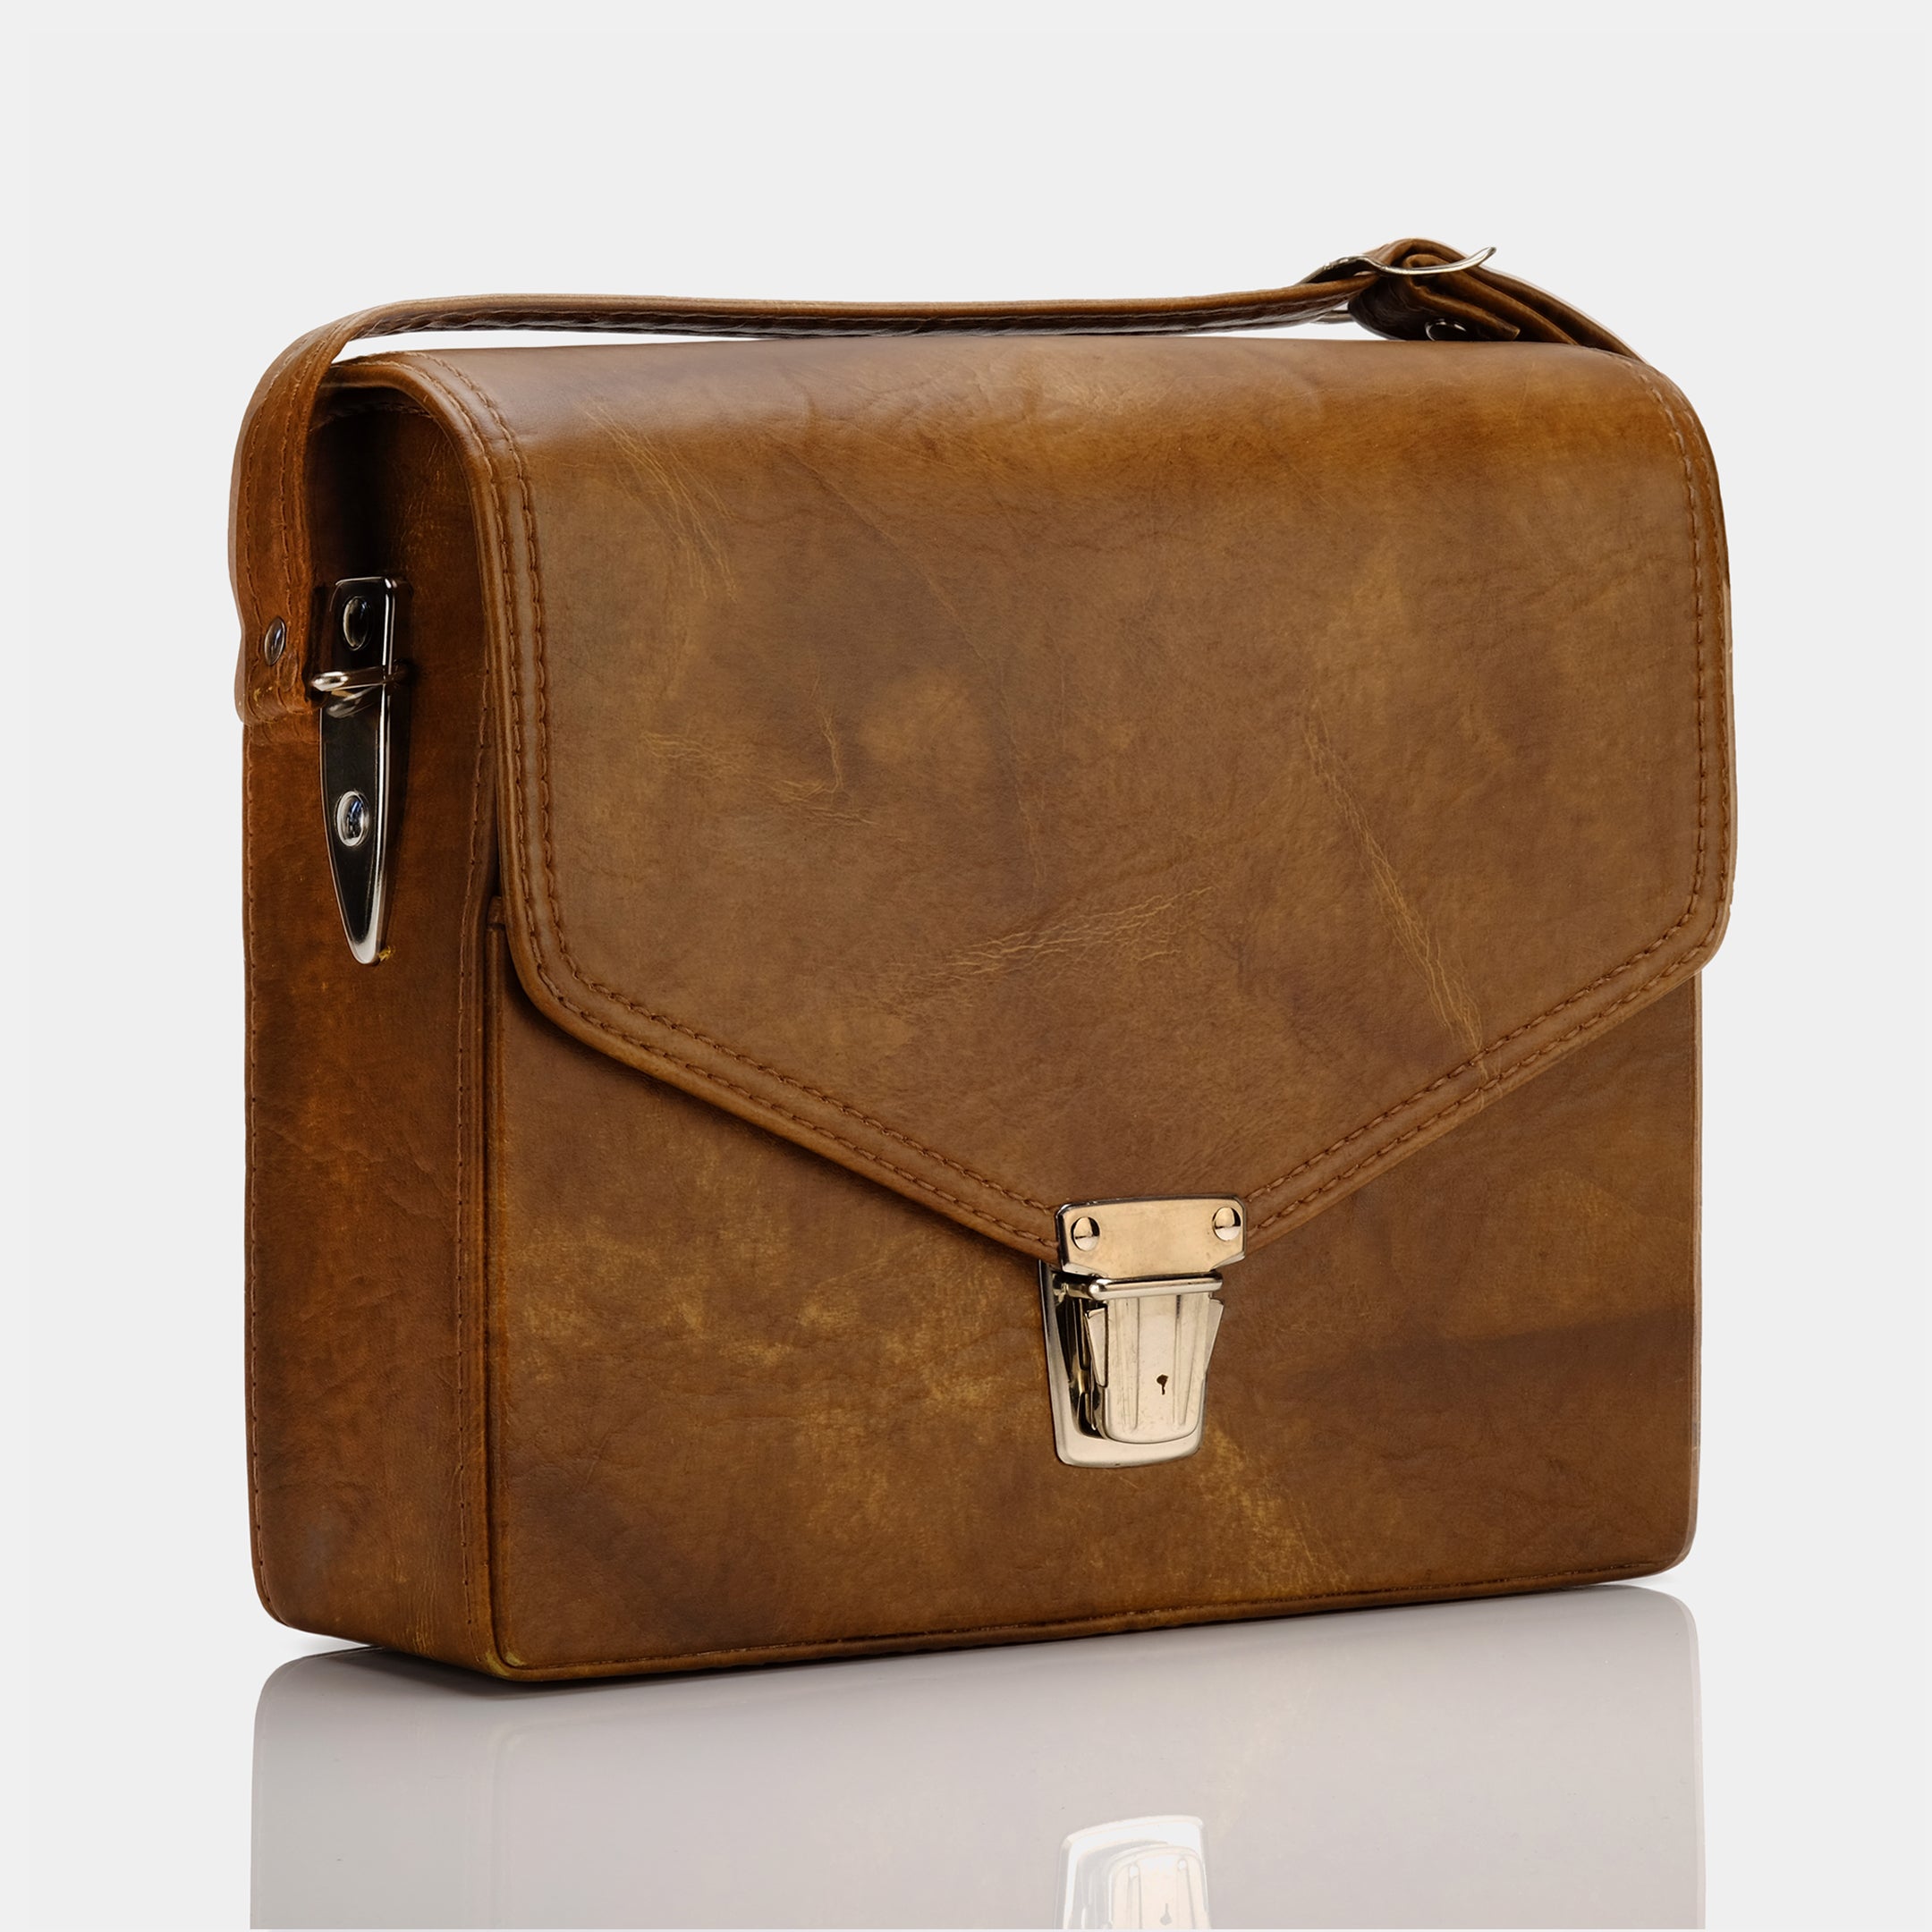 Brown Leather Folding Camera Bag With Detachable Strap